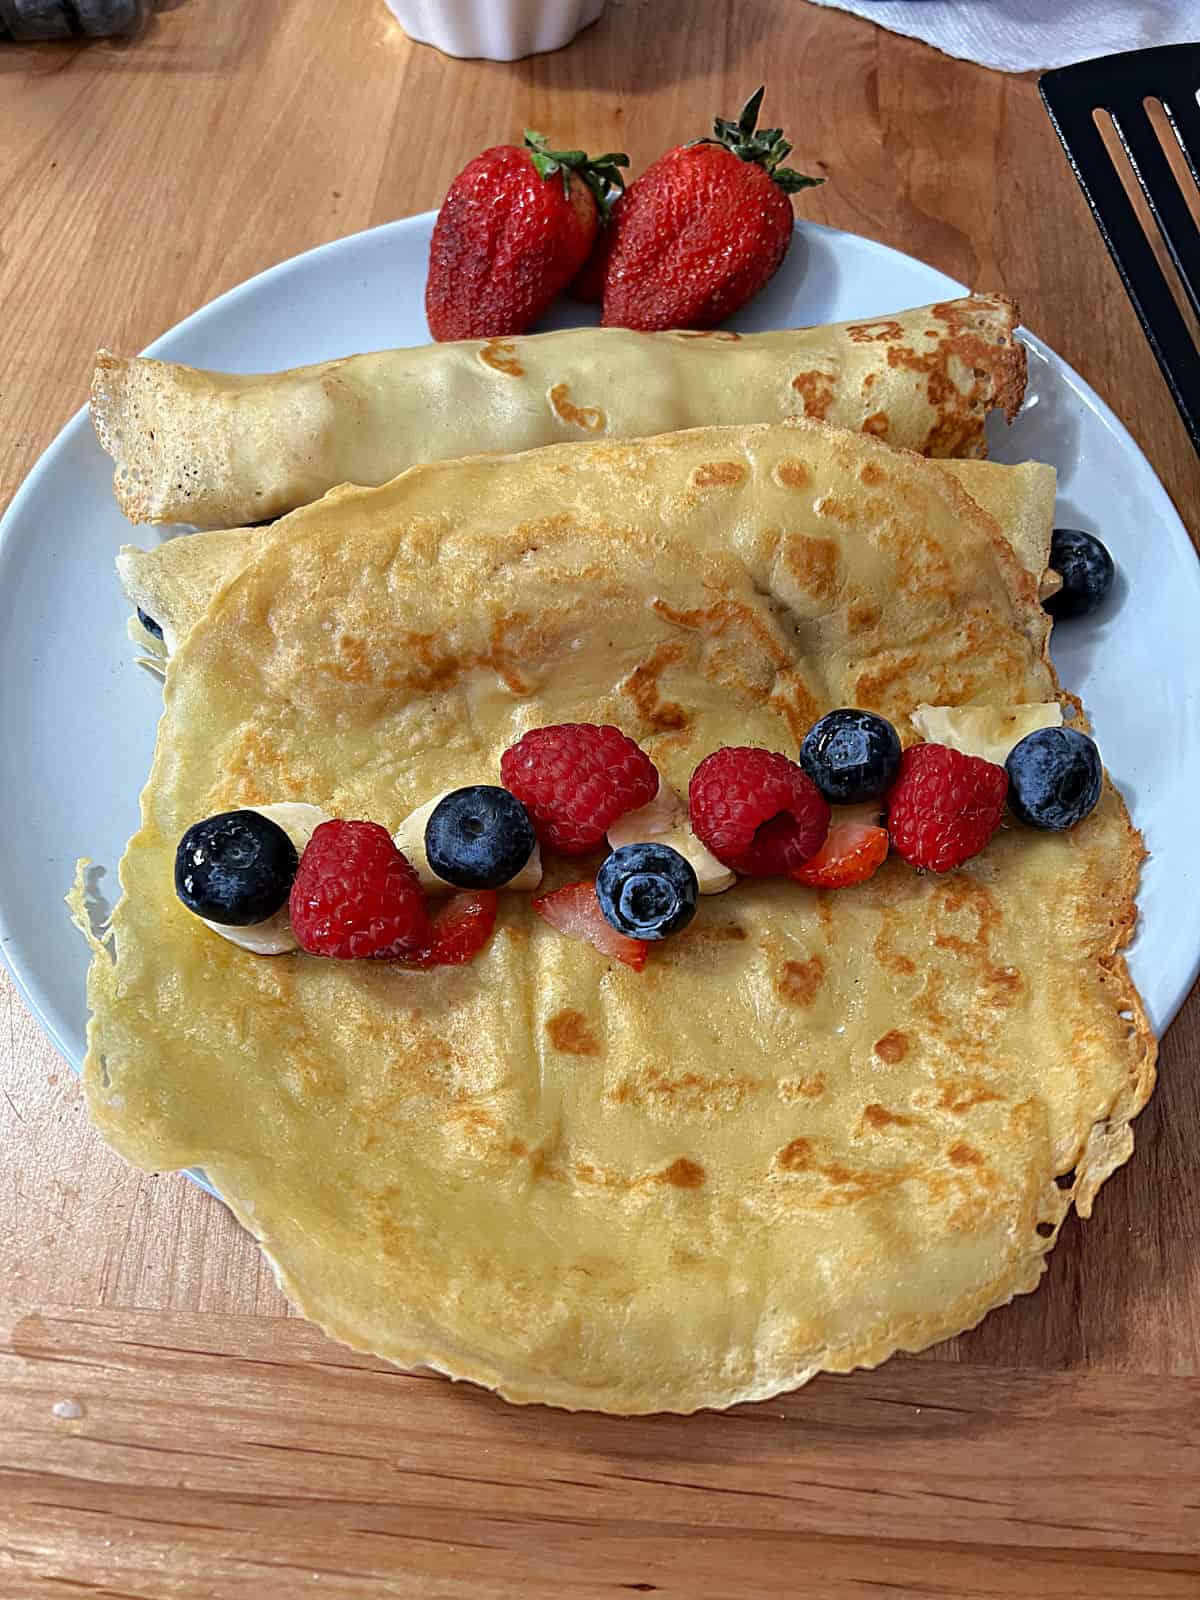 cooked crepe on a plate with berries added in a line down the middle, ready to roll up.